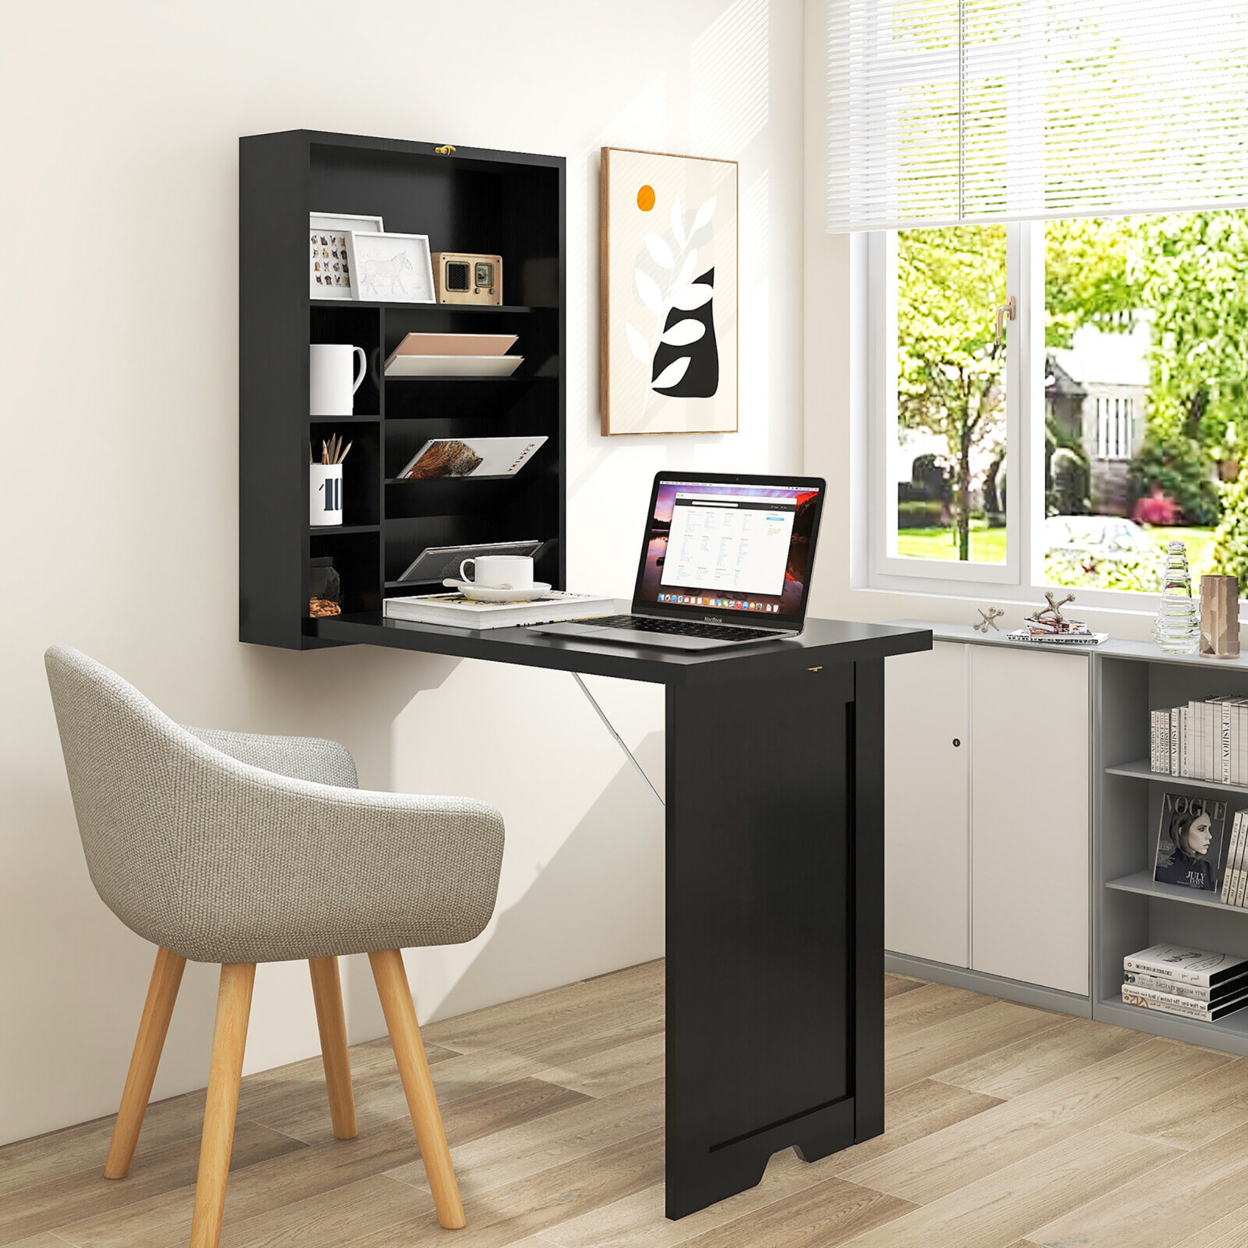 Wall Mounted Computer Convertible Desk Floating Desk W/ Storage Bookcases Black